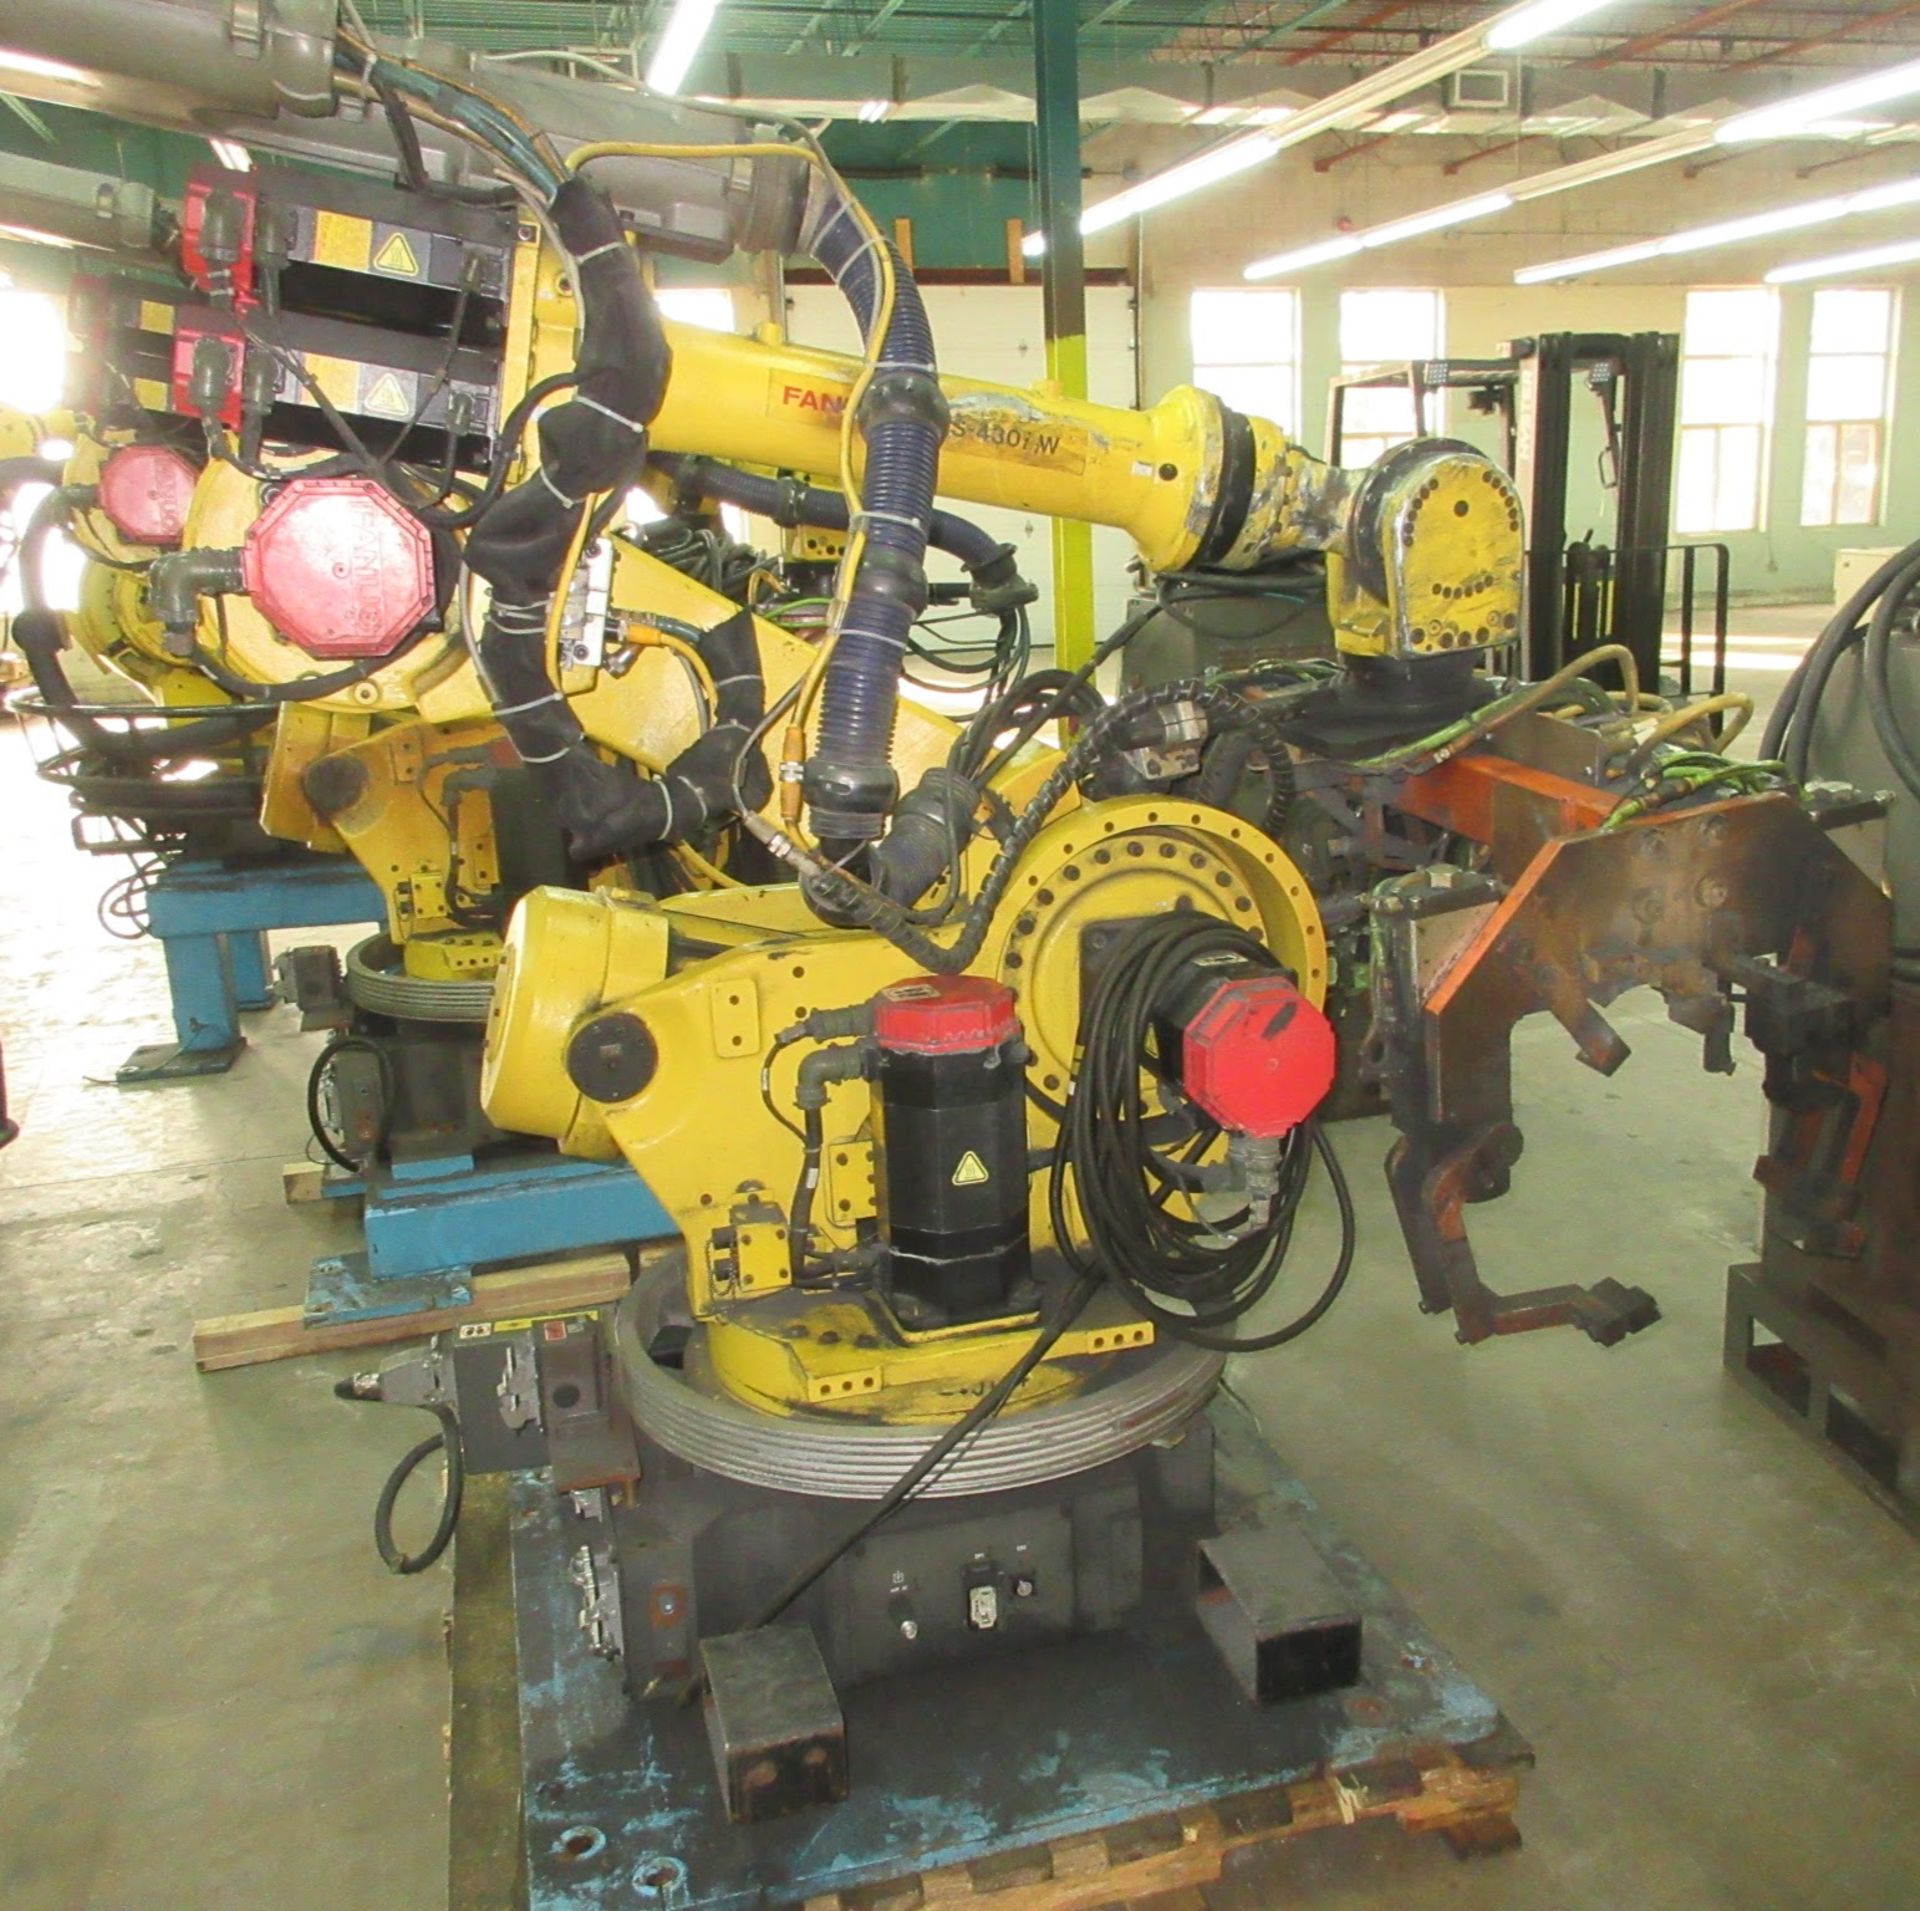 FANUC S-430IW LOADING ROBOT W/ SYSTEM RJ3 ROBOT CONTROLLER, CABLES AND TEACH PENDANT (LOCATED IN - Image 3 of 9